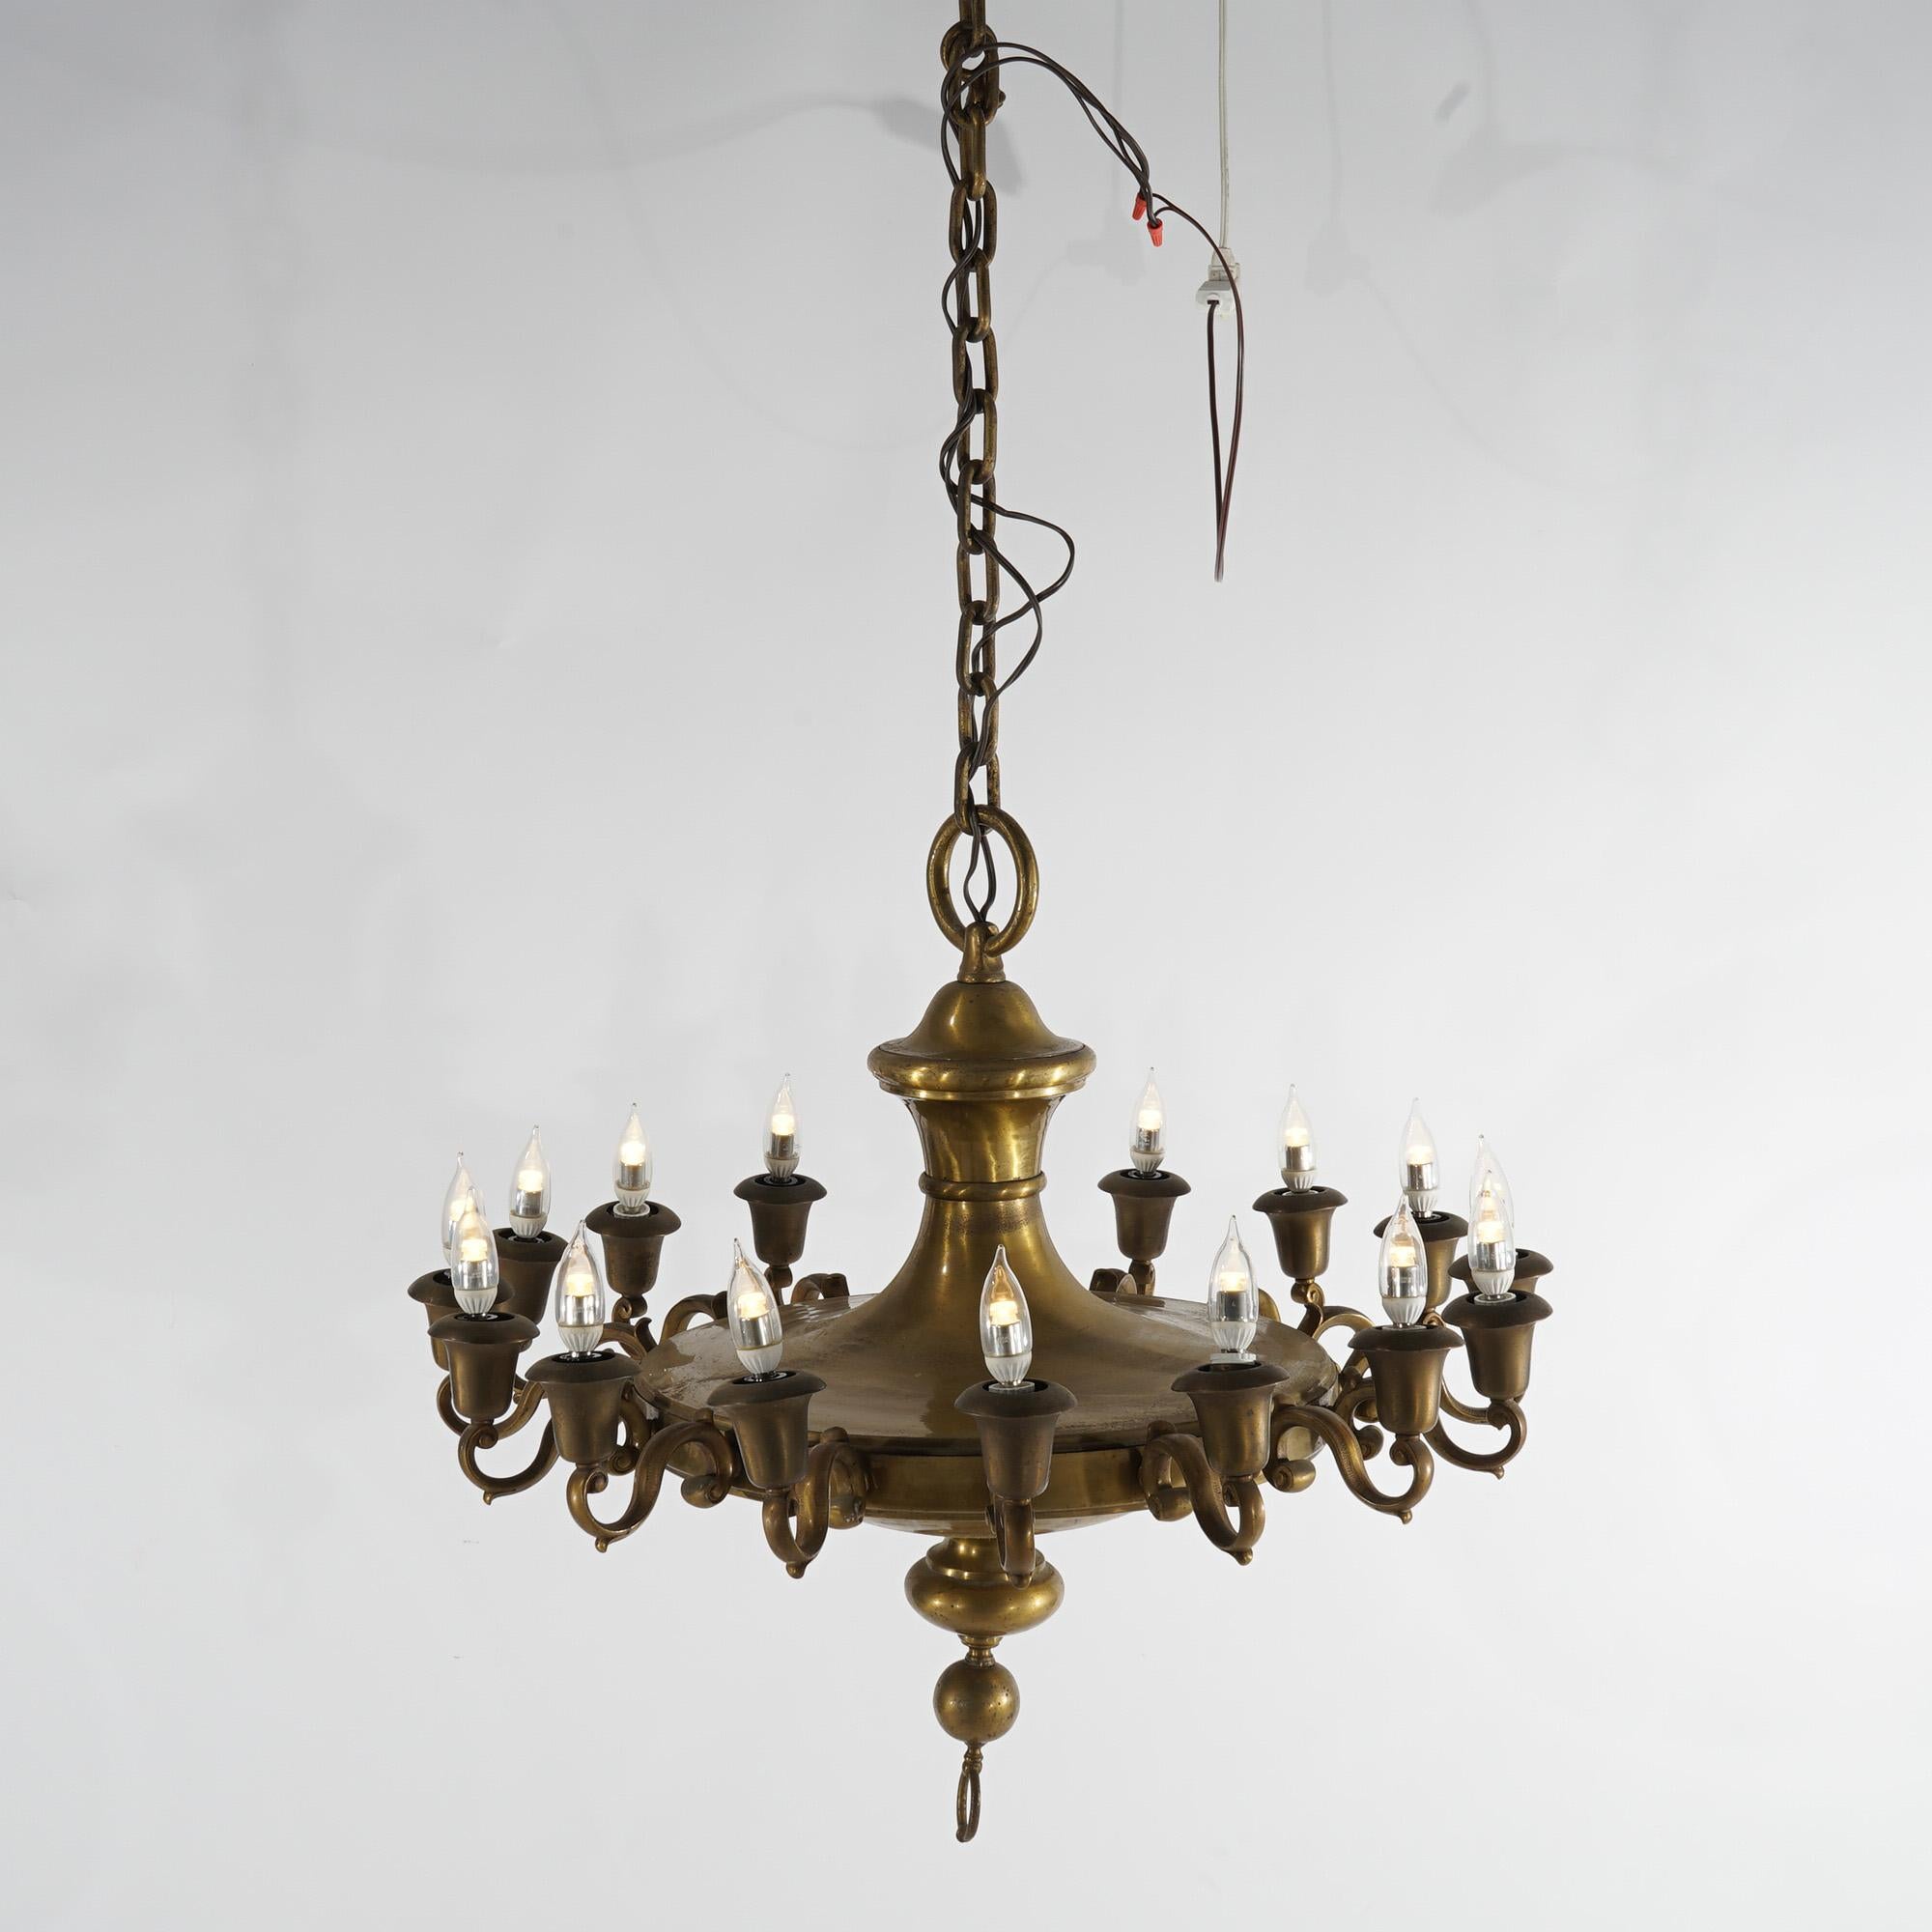 Antique Oversized French Empire Style Brass  16-Light Pan Chandelier, 20th C For Sale 11